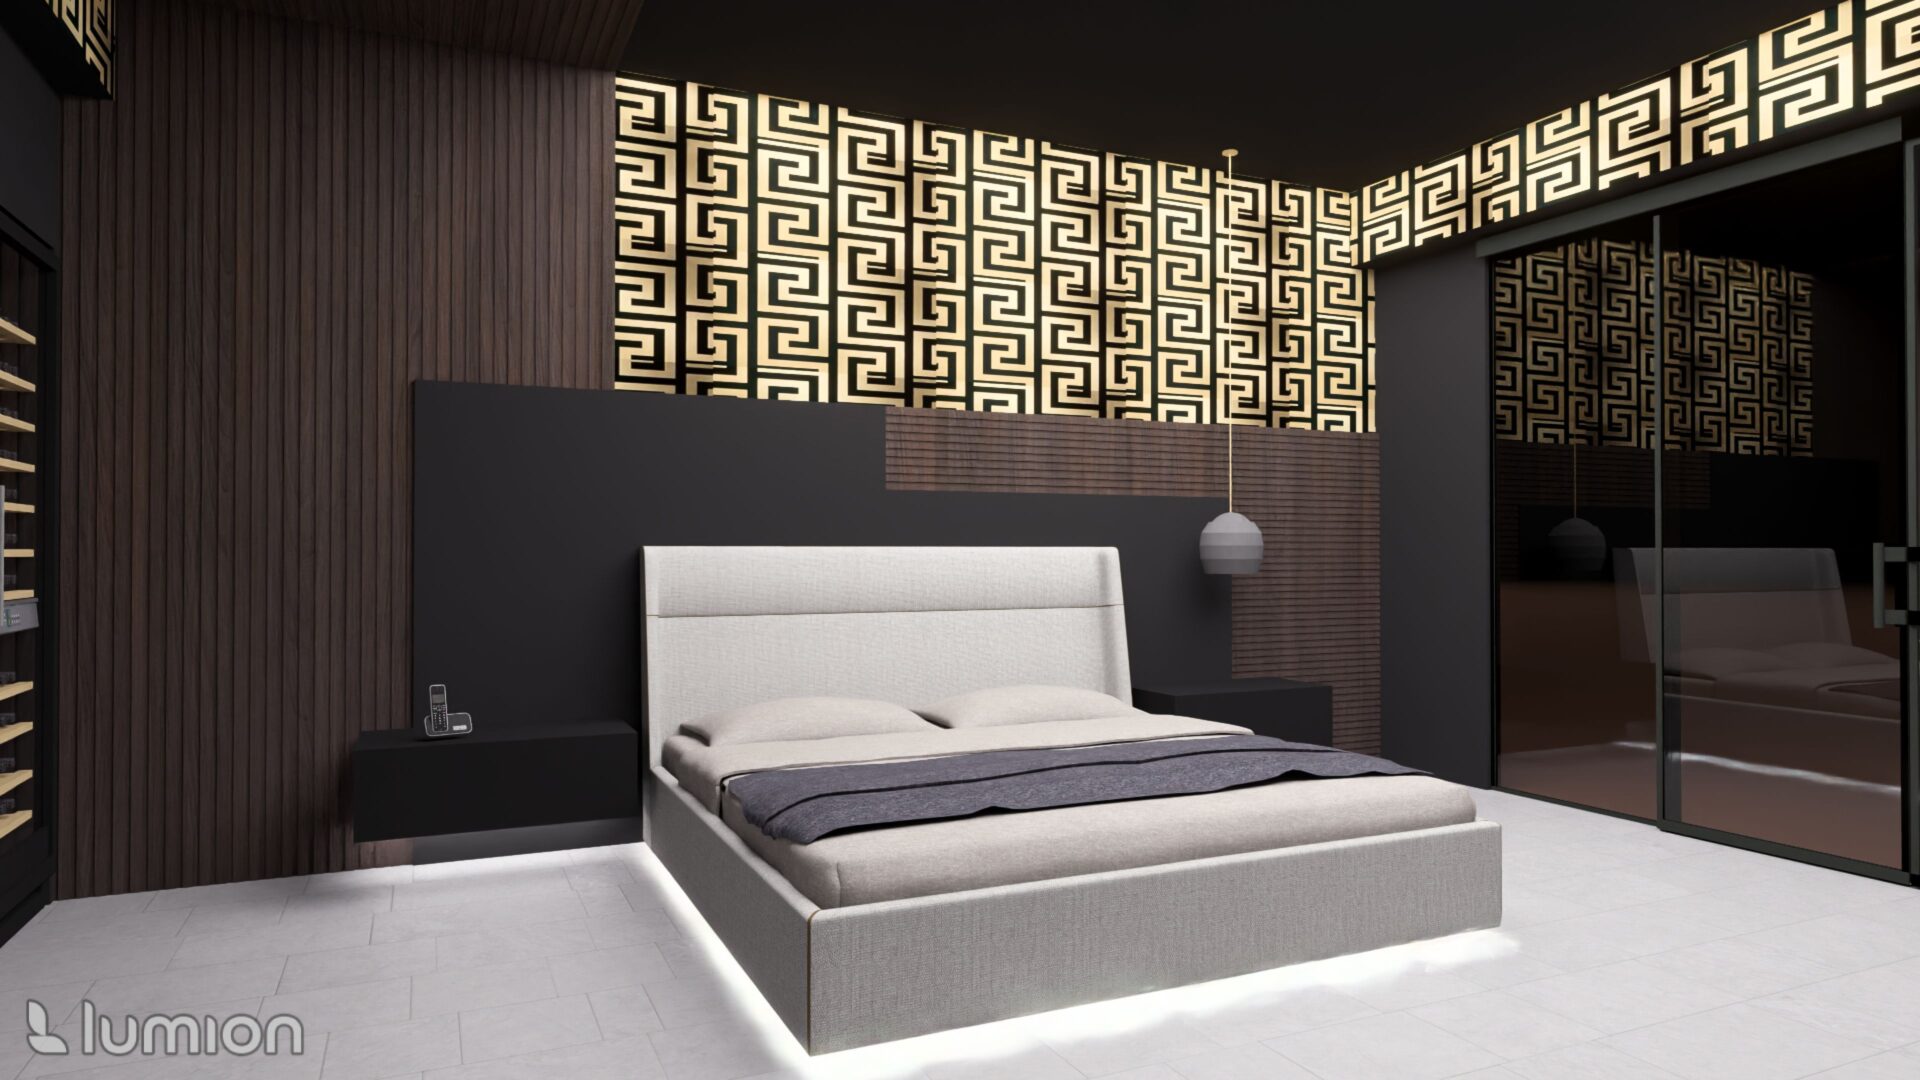 A bed room with a white and black theme